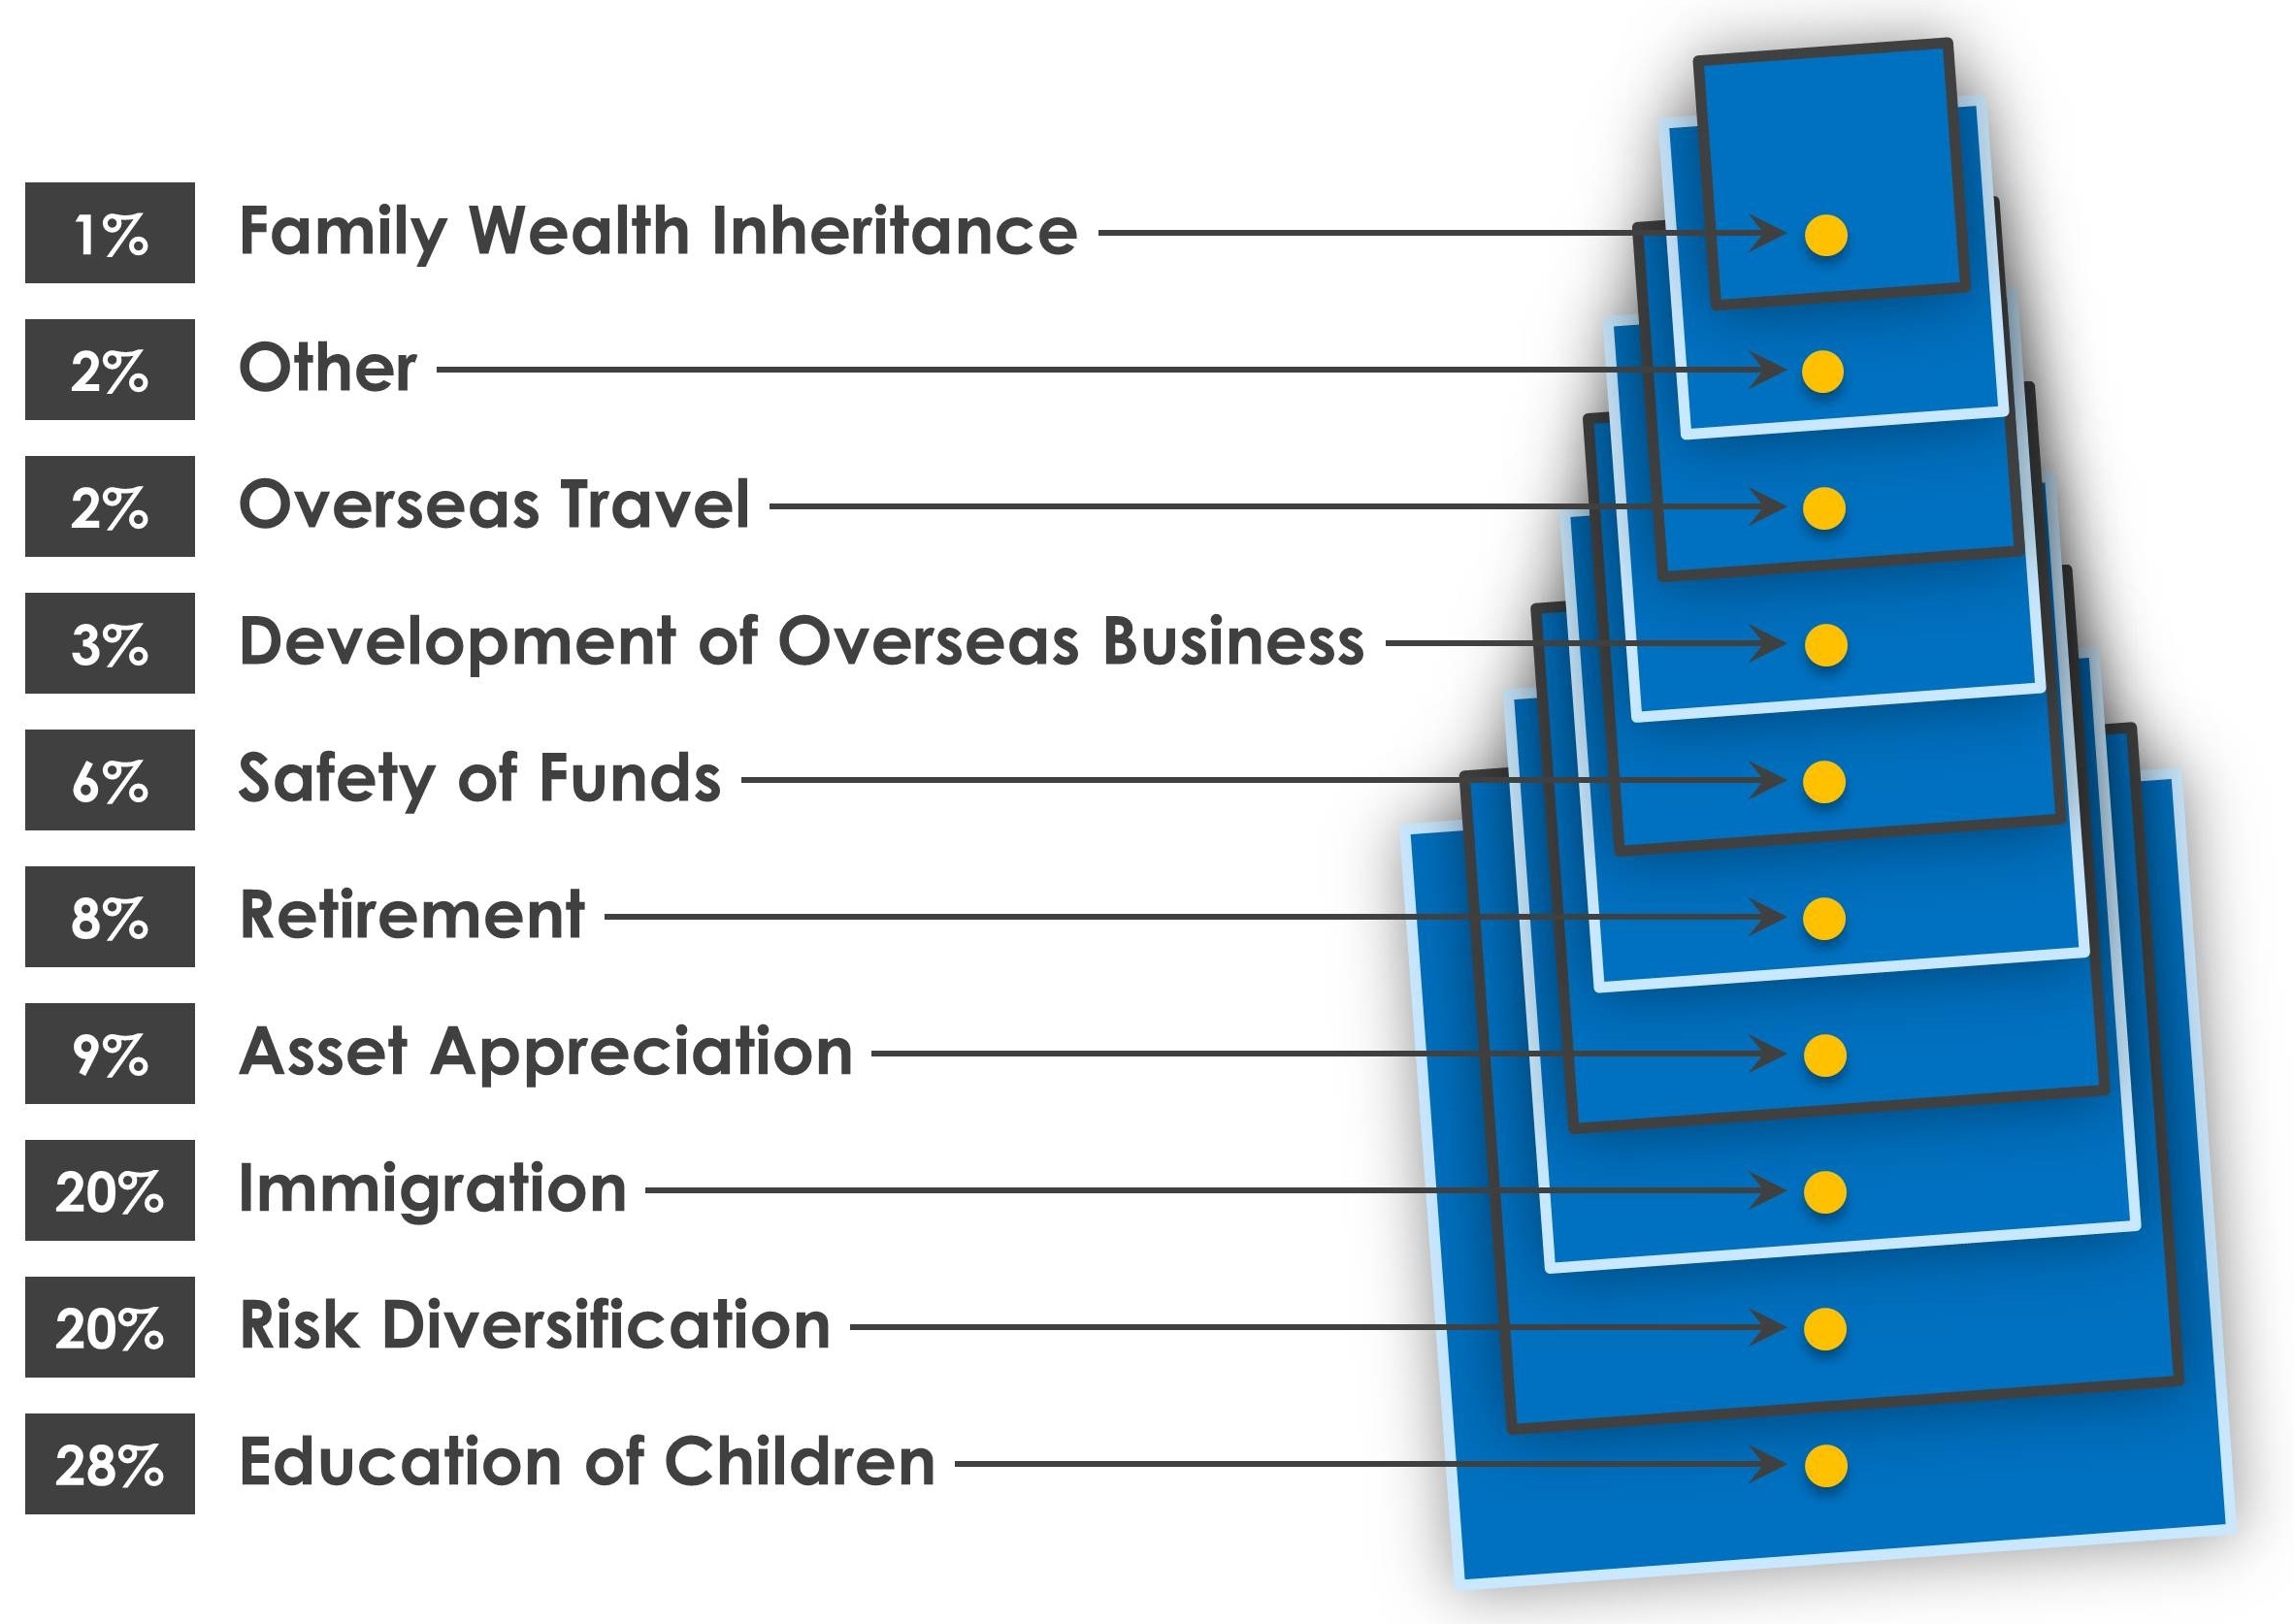 Graph showing the top 10 reasons for overseas investments. 28% stated the education of children was most important.